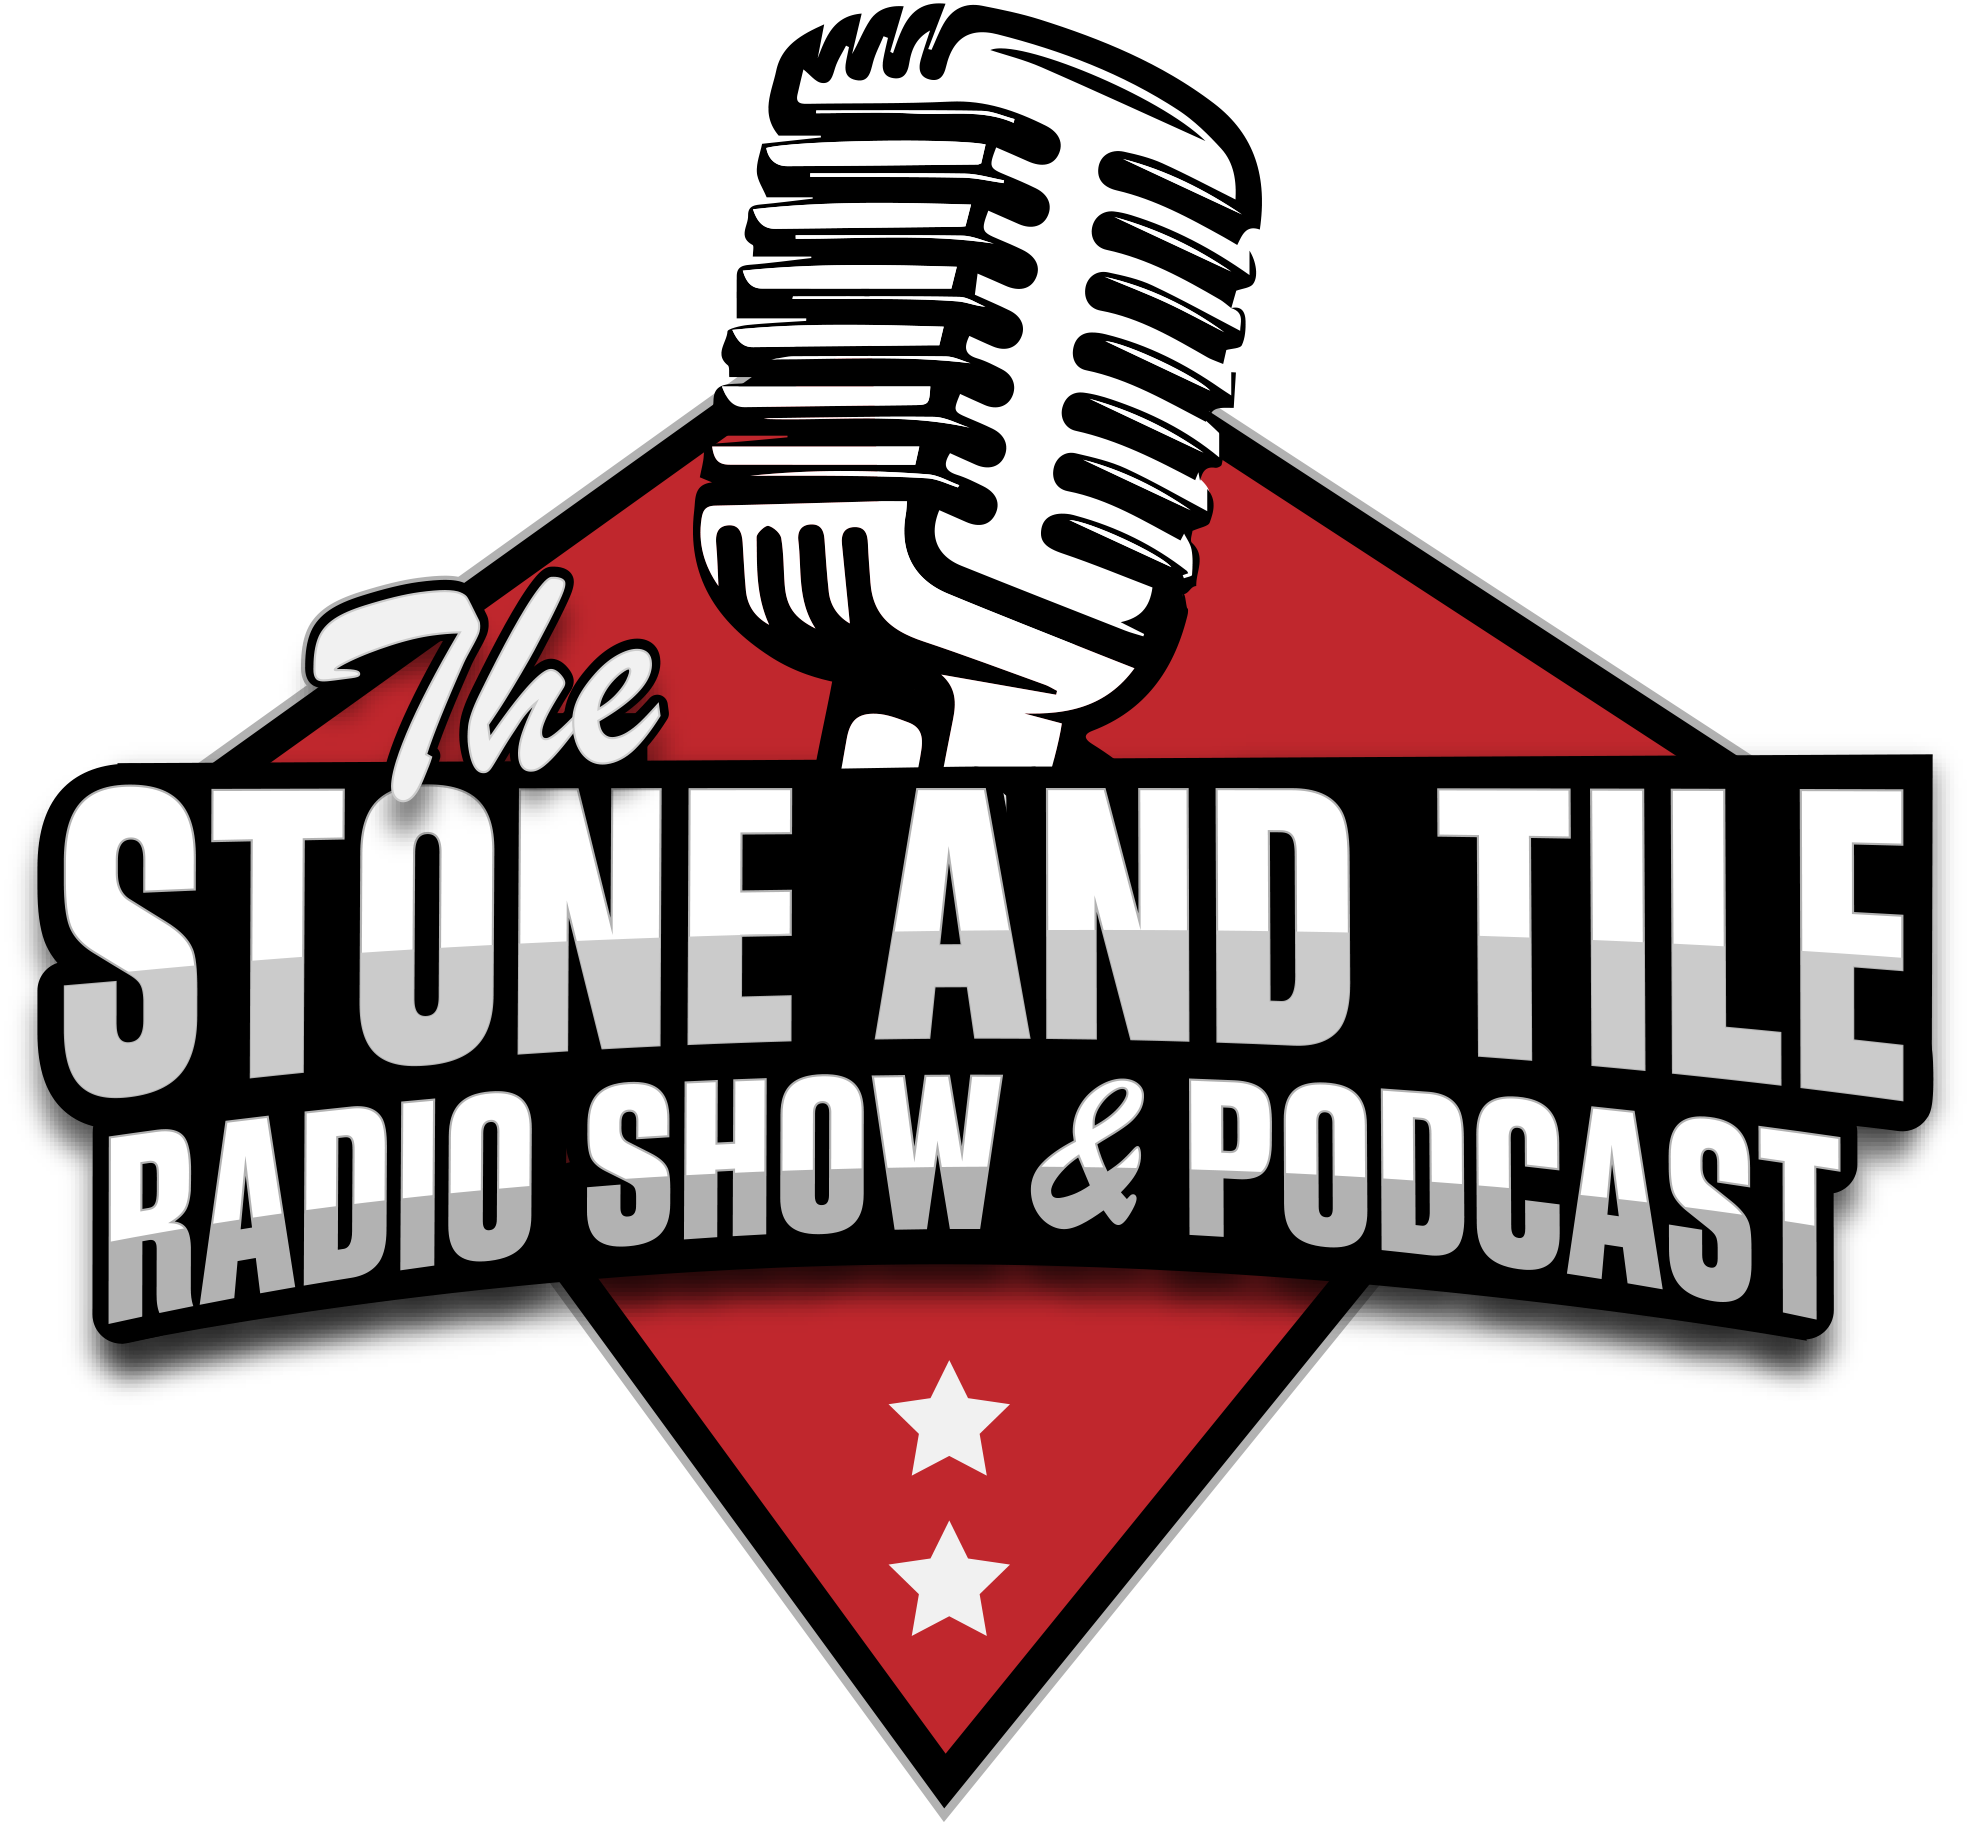 The Stone and Tile Radio Show Podcast